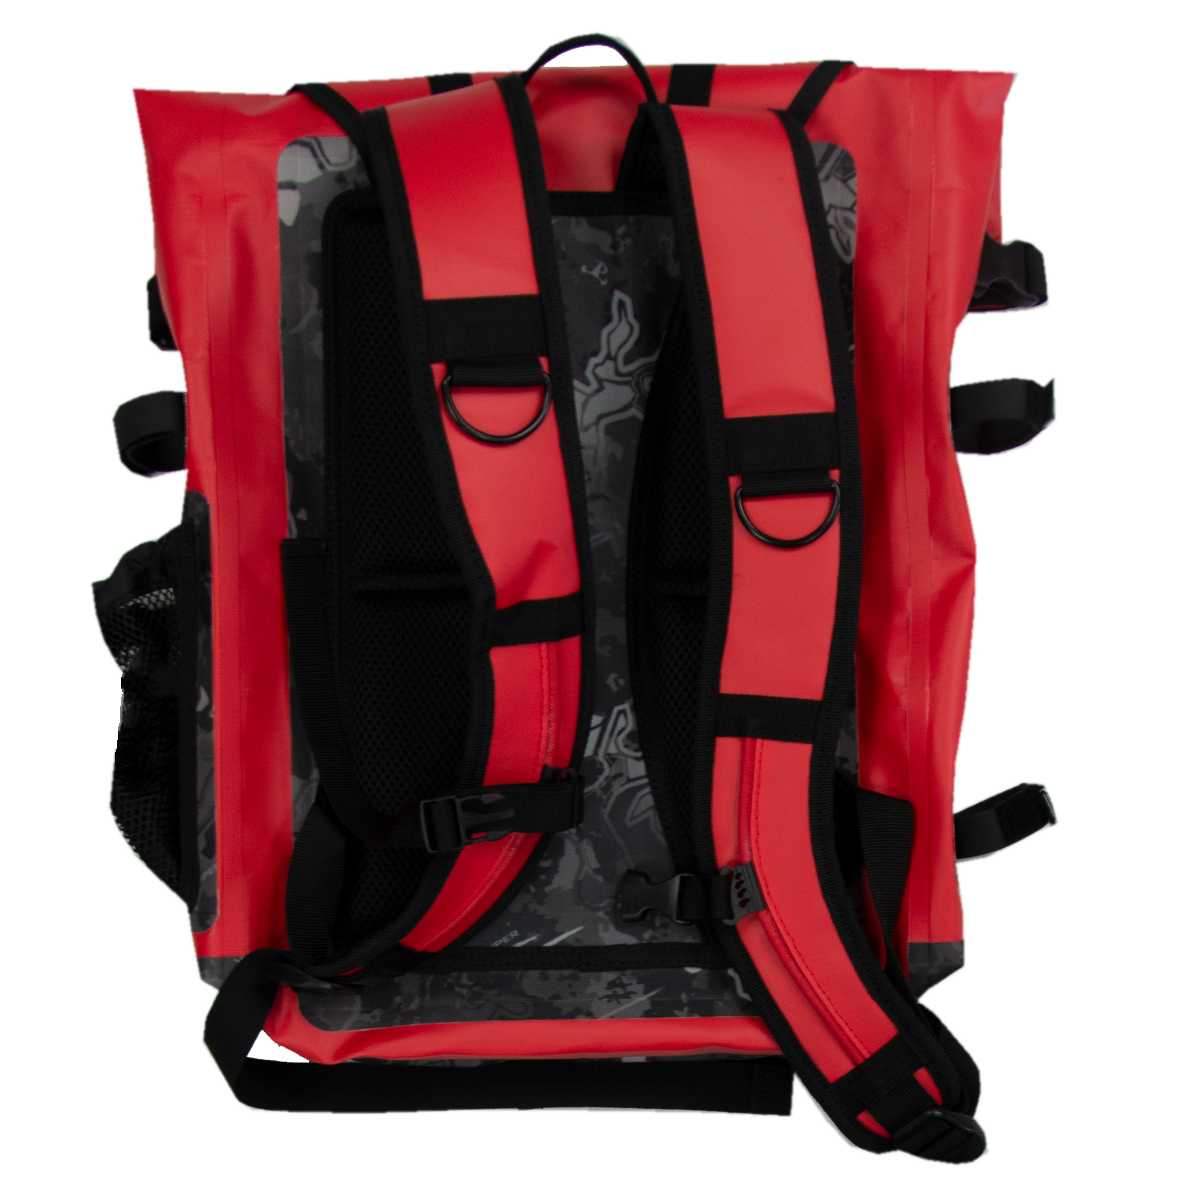 20L Dry Gear Backpack - Red Hot/Viper Urban